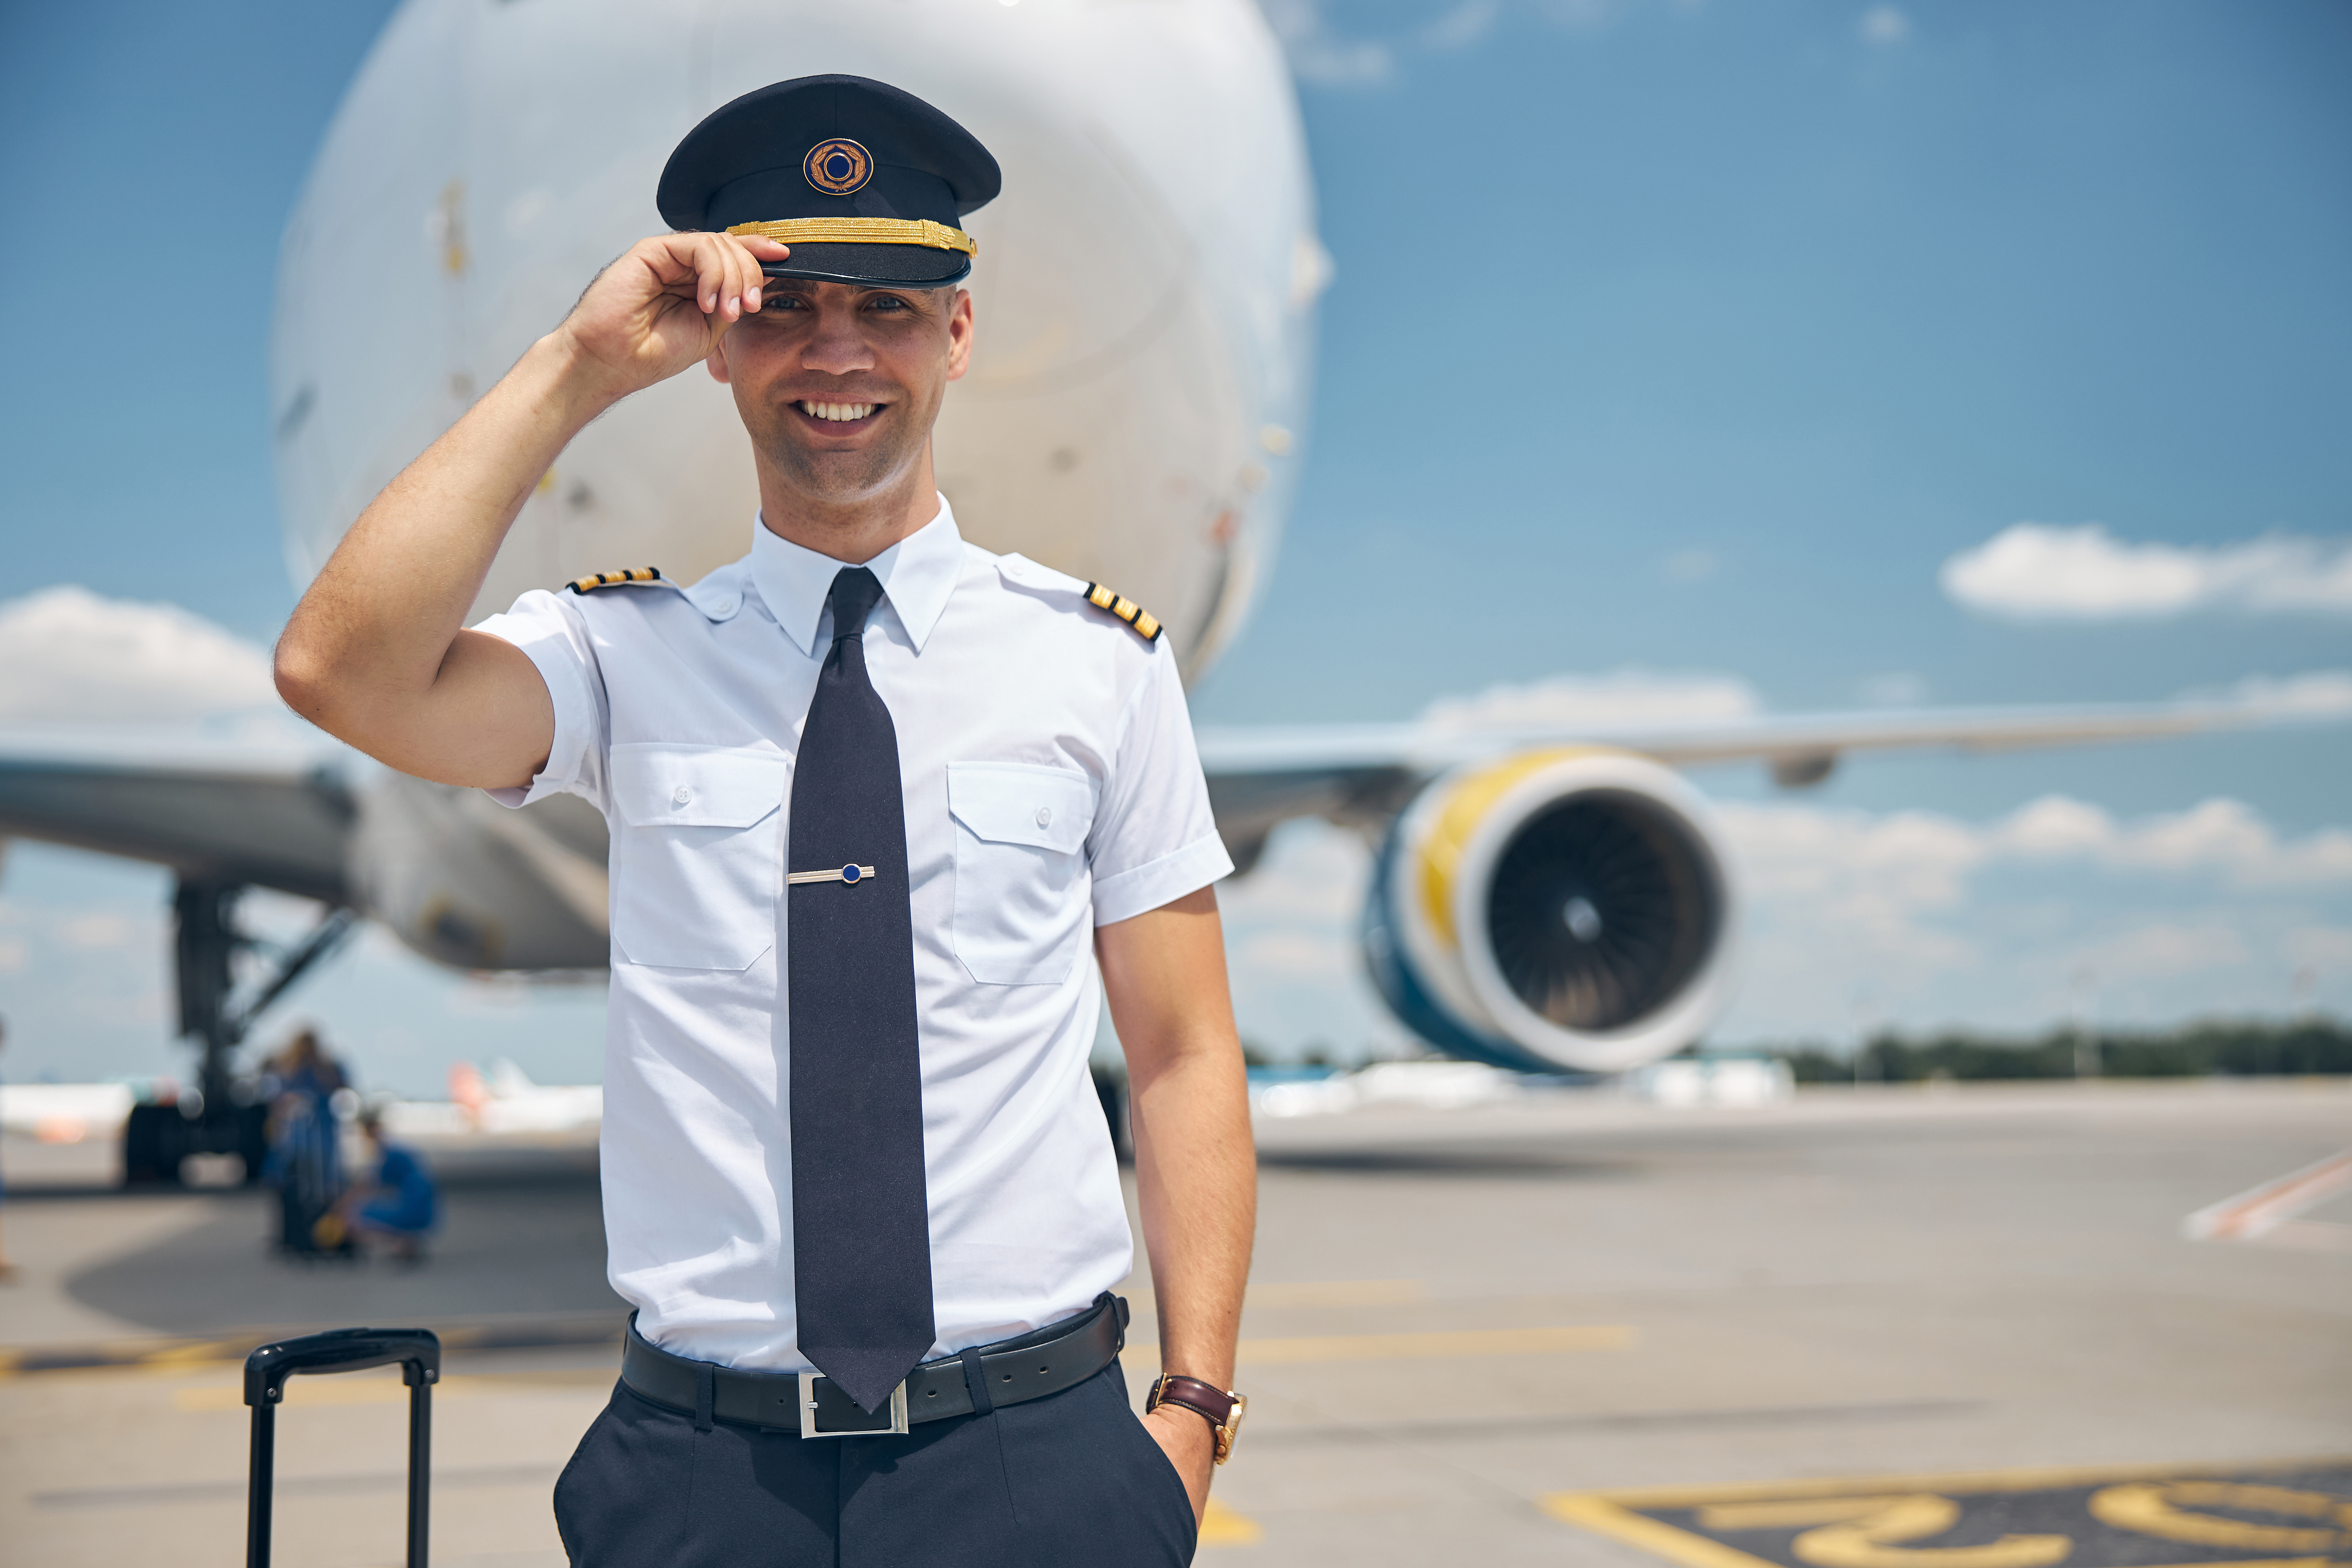 Cheerful young man airline worker touching captain hat and smiling while standing in airfield with airplane on background. | Source: Shutterstock